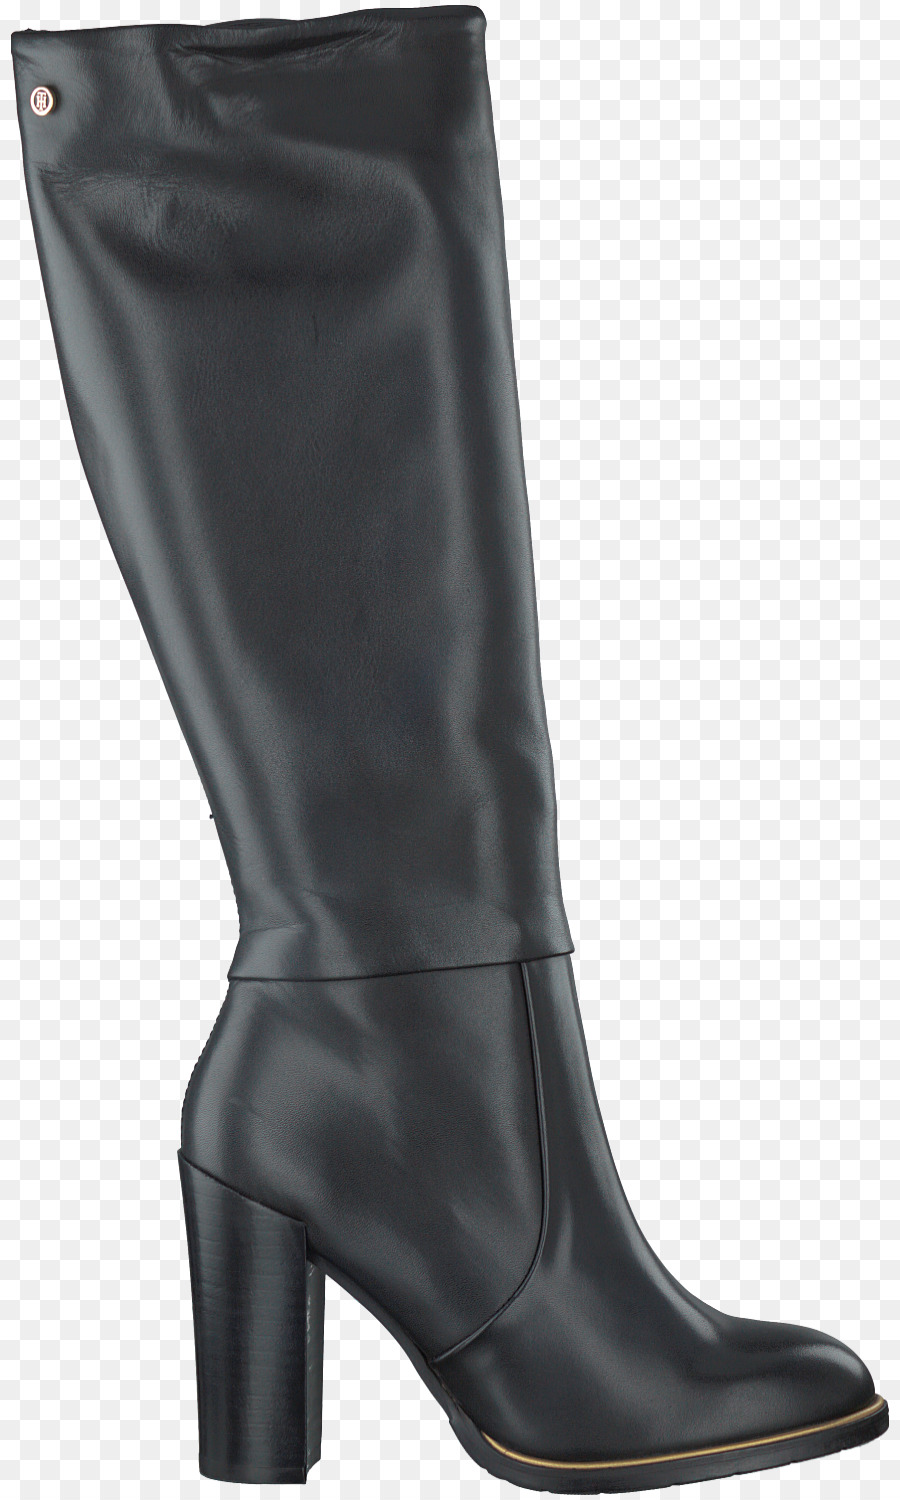 Riding Boot Riding Boot